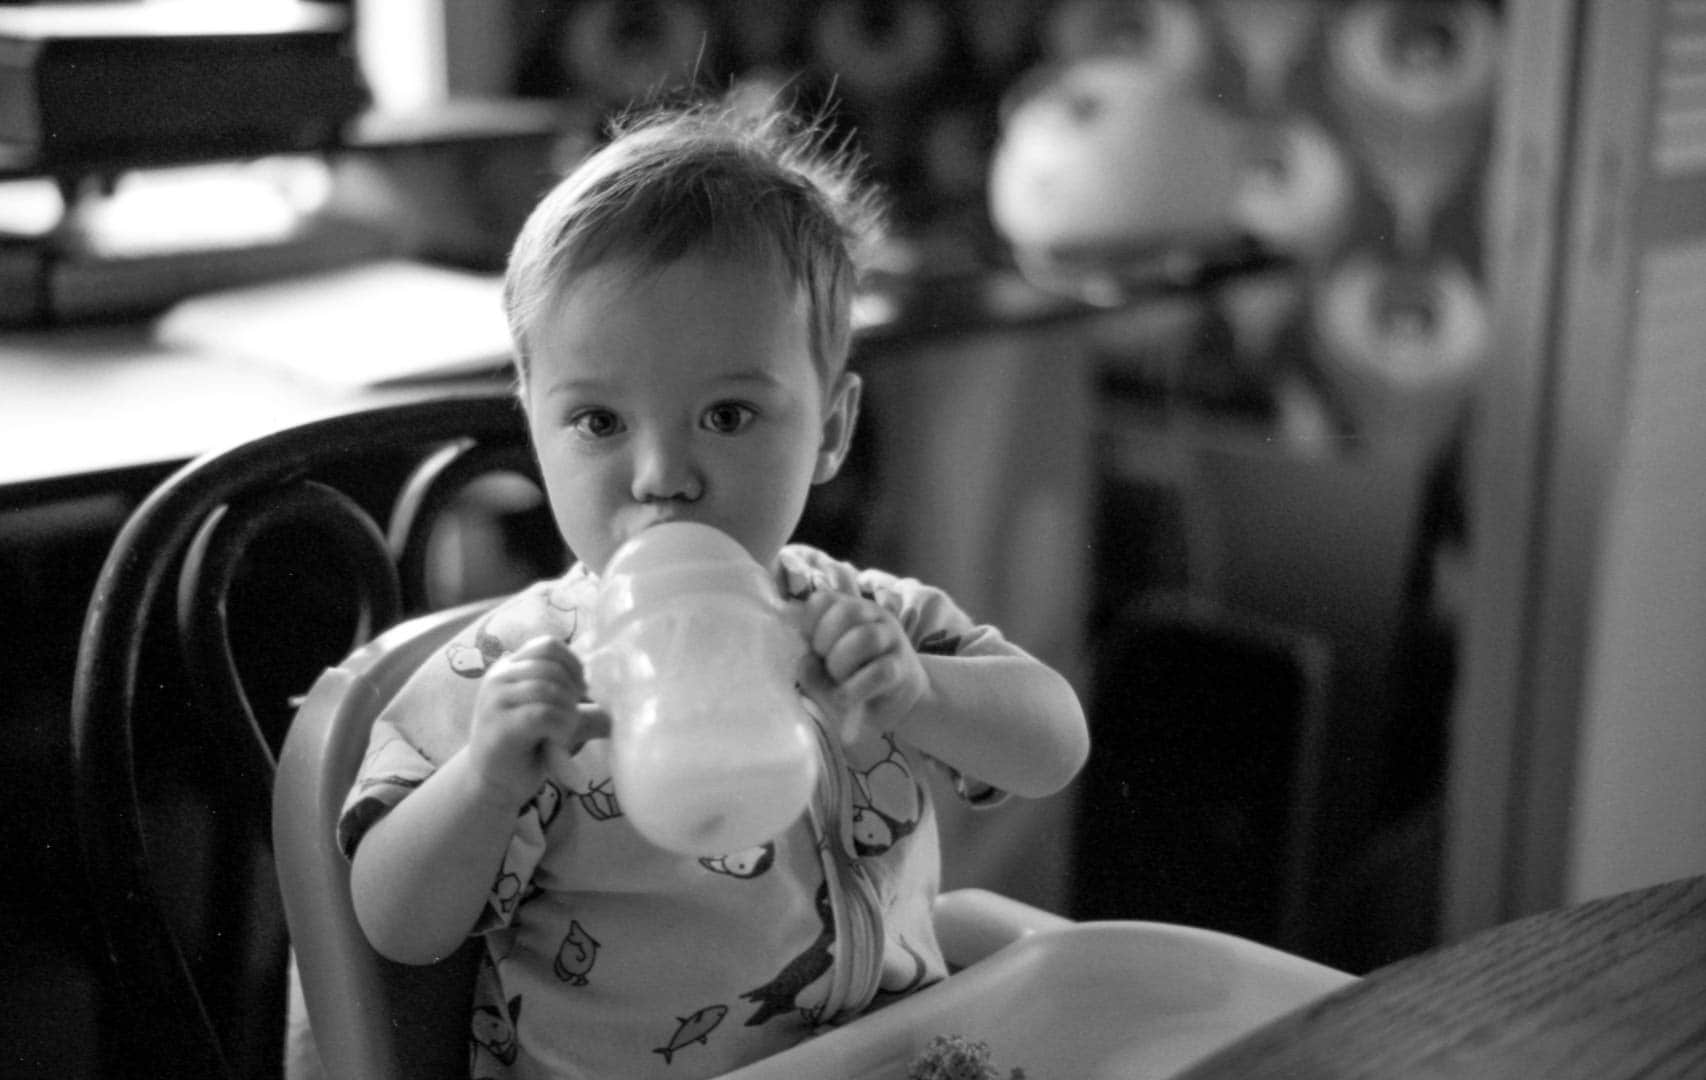 A baby drinking milk from a sippy cup at a dining room table